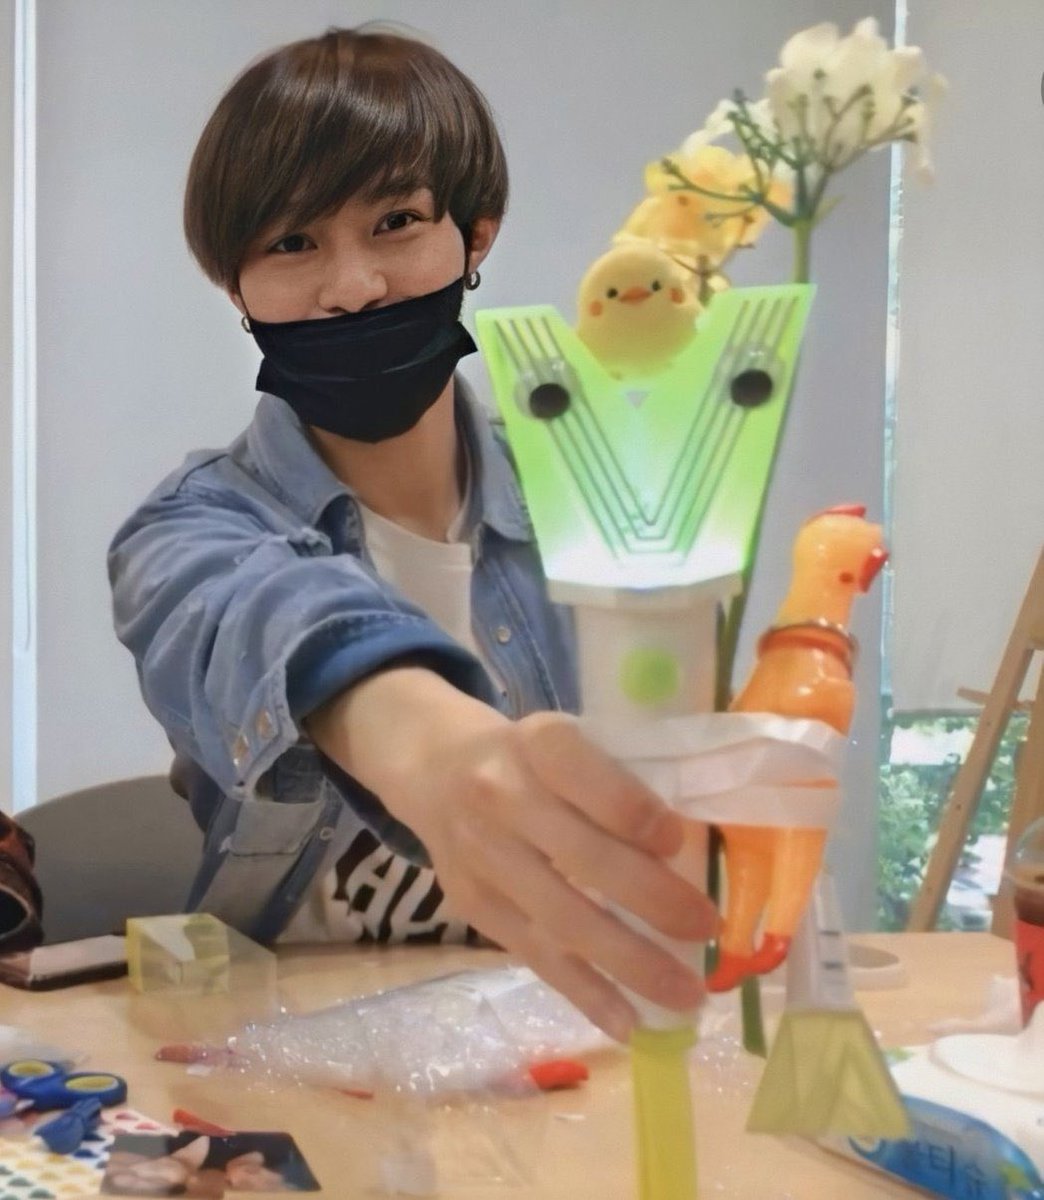 two: yangyang as snorkmaiden.p.s even though it's not exact snorkmaiden is usually associated with flowers so i chose the picture of him making a leekbong bouquet! 